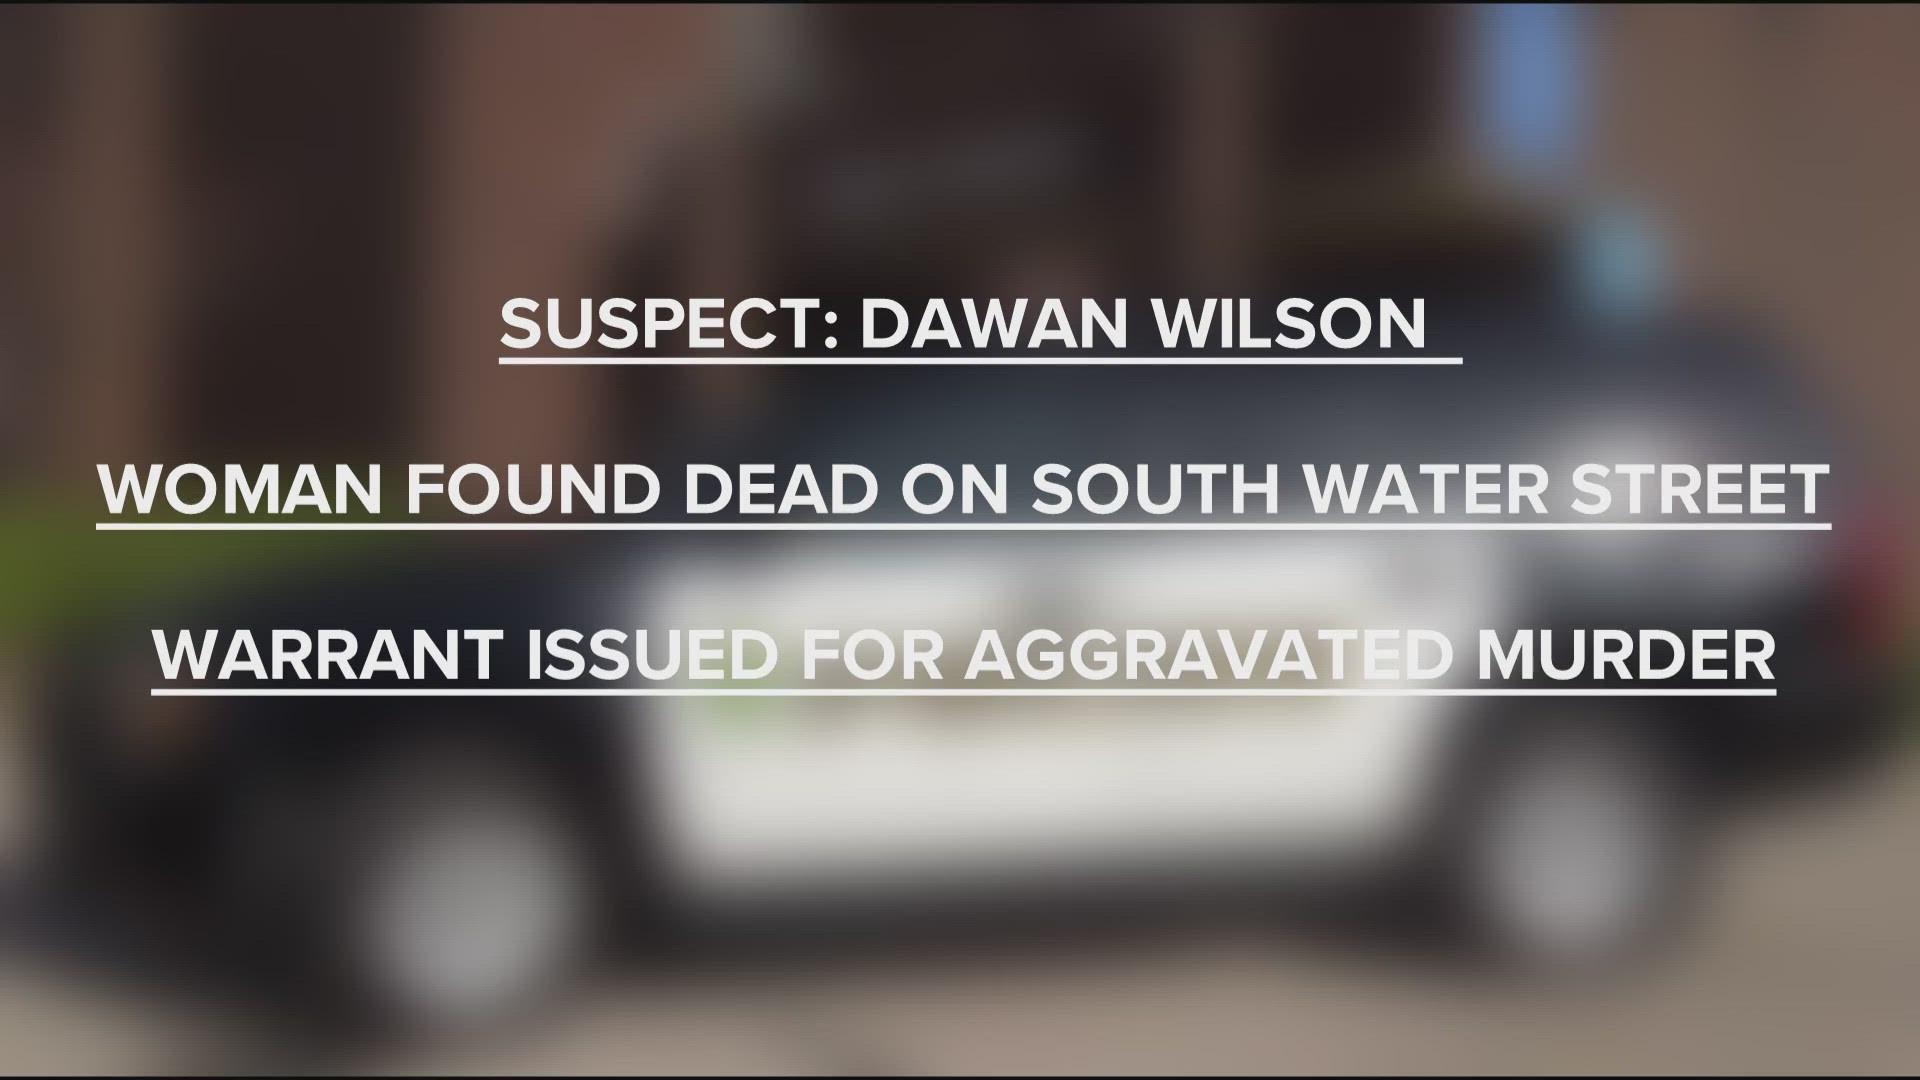 Kent police have obtained a warrant for Dawan Wilson for the charge of aggravated murder and are working to locate him.